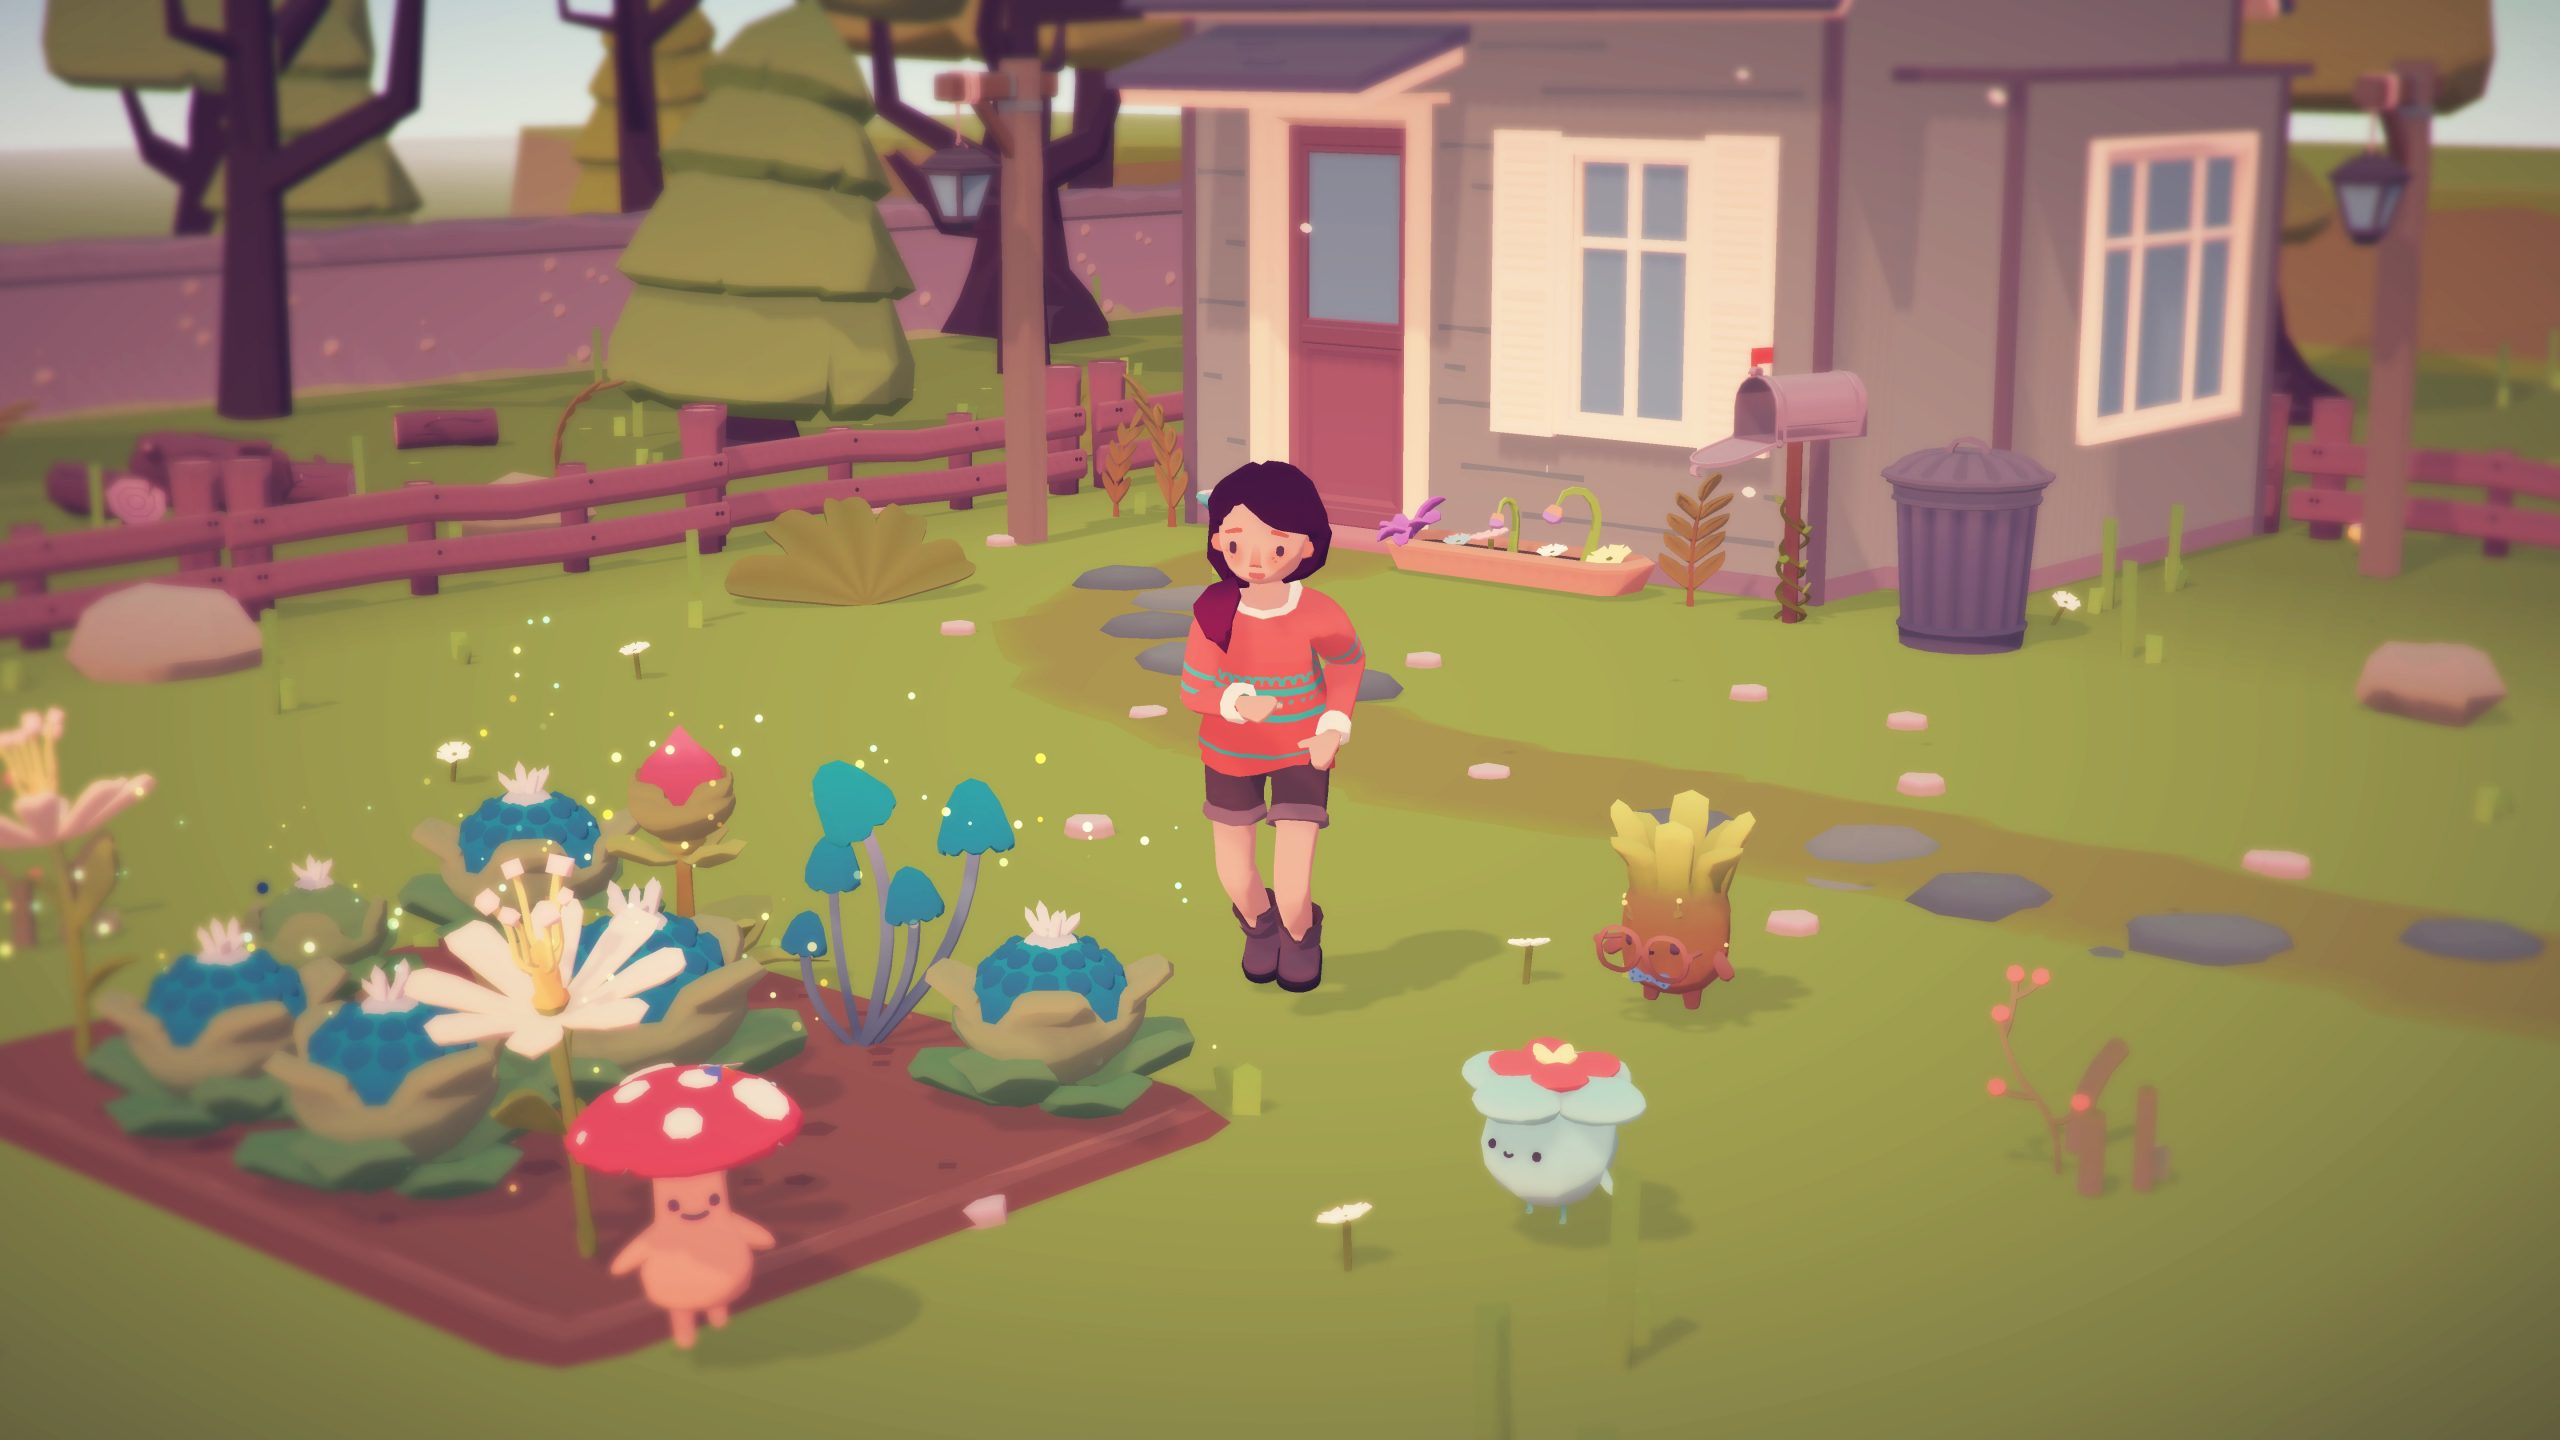 A screenshot from the video game Ooblets showing the main character stood outside her house/farm.